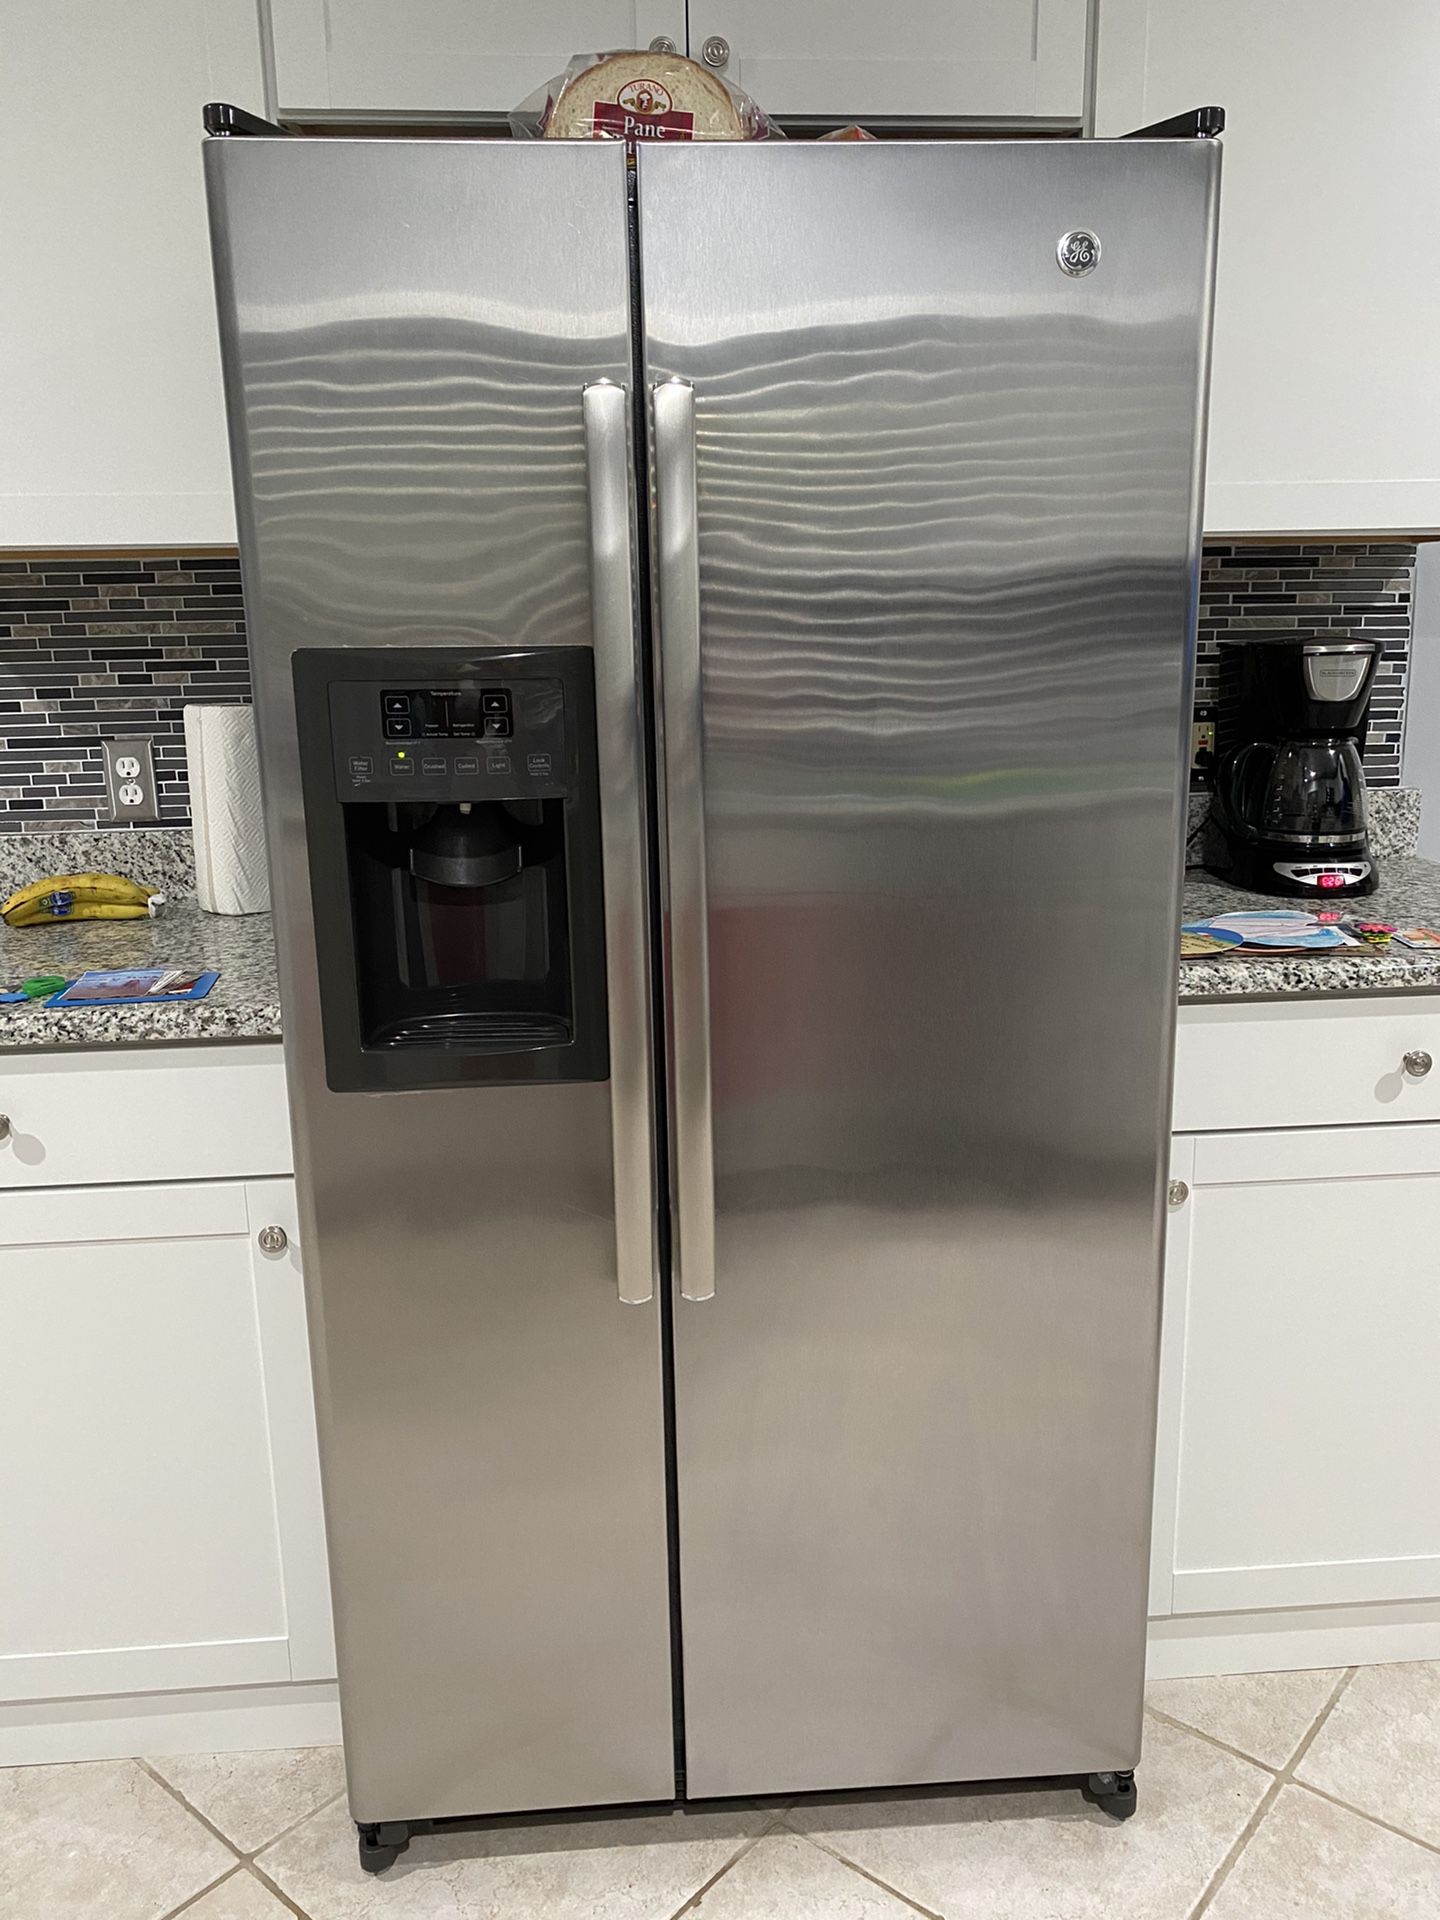 GE stainless steel side by side refrigerator